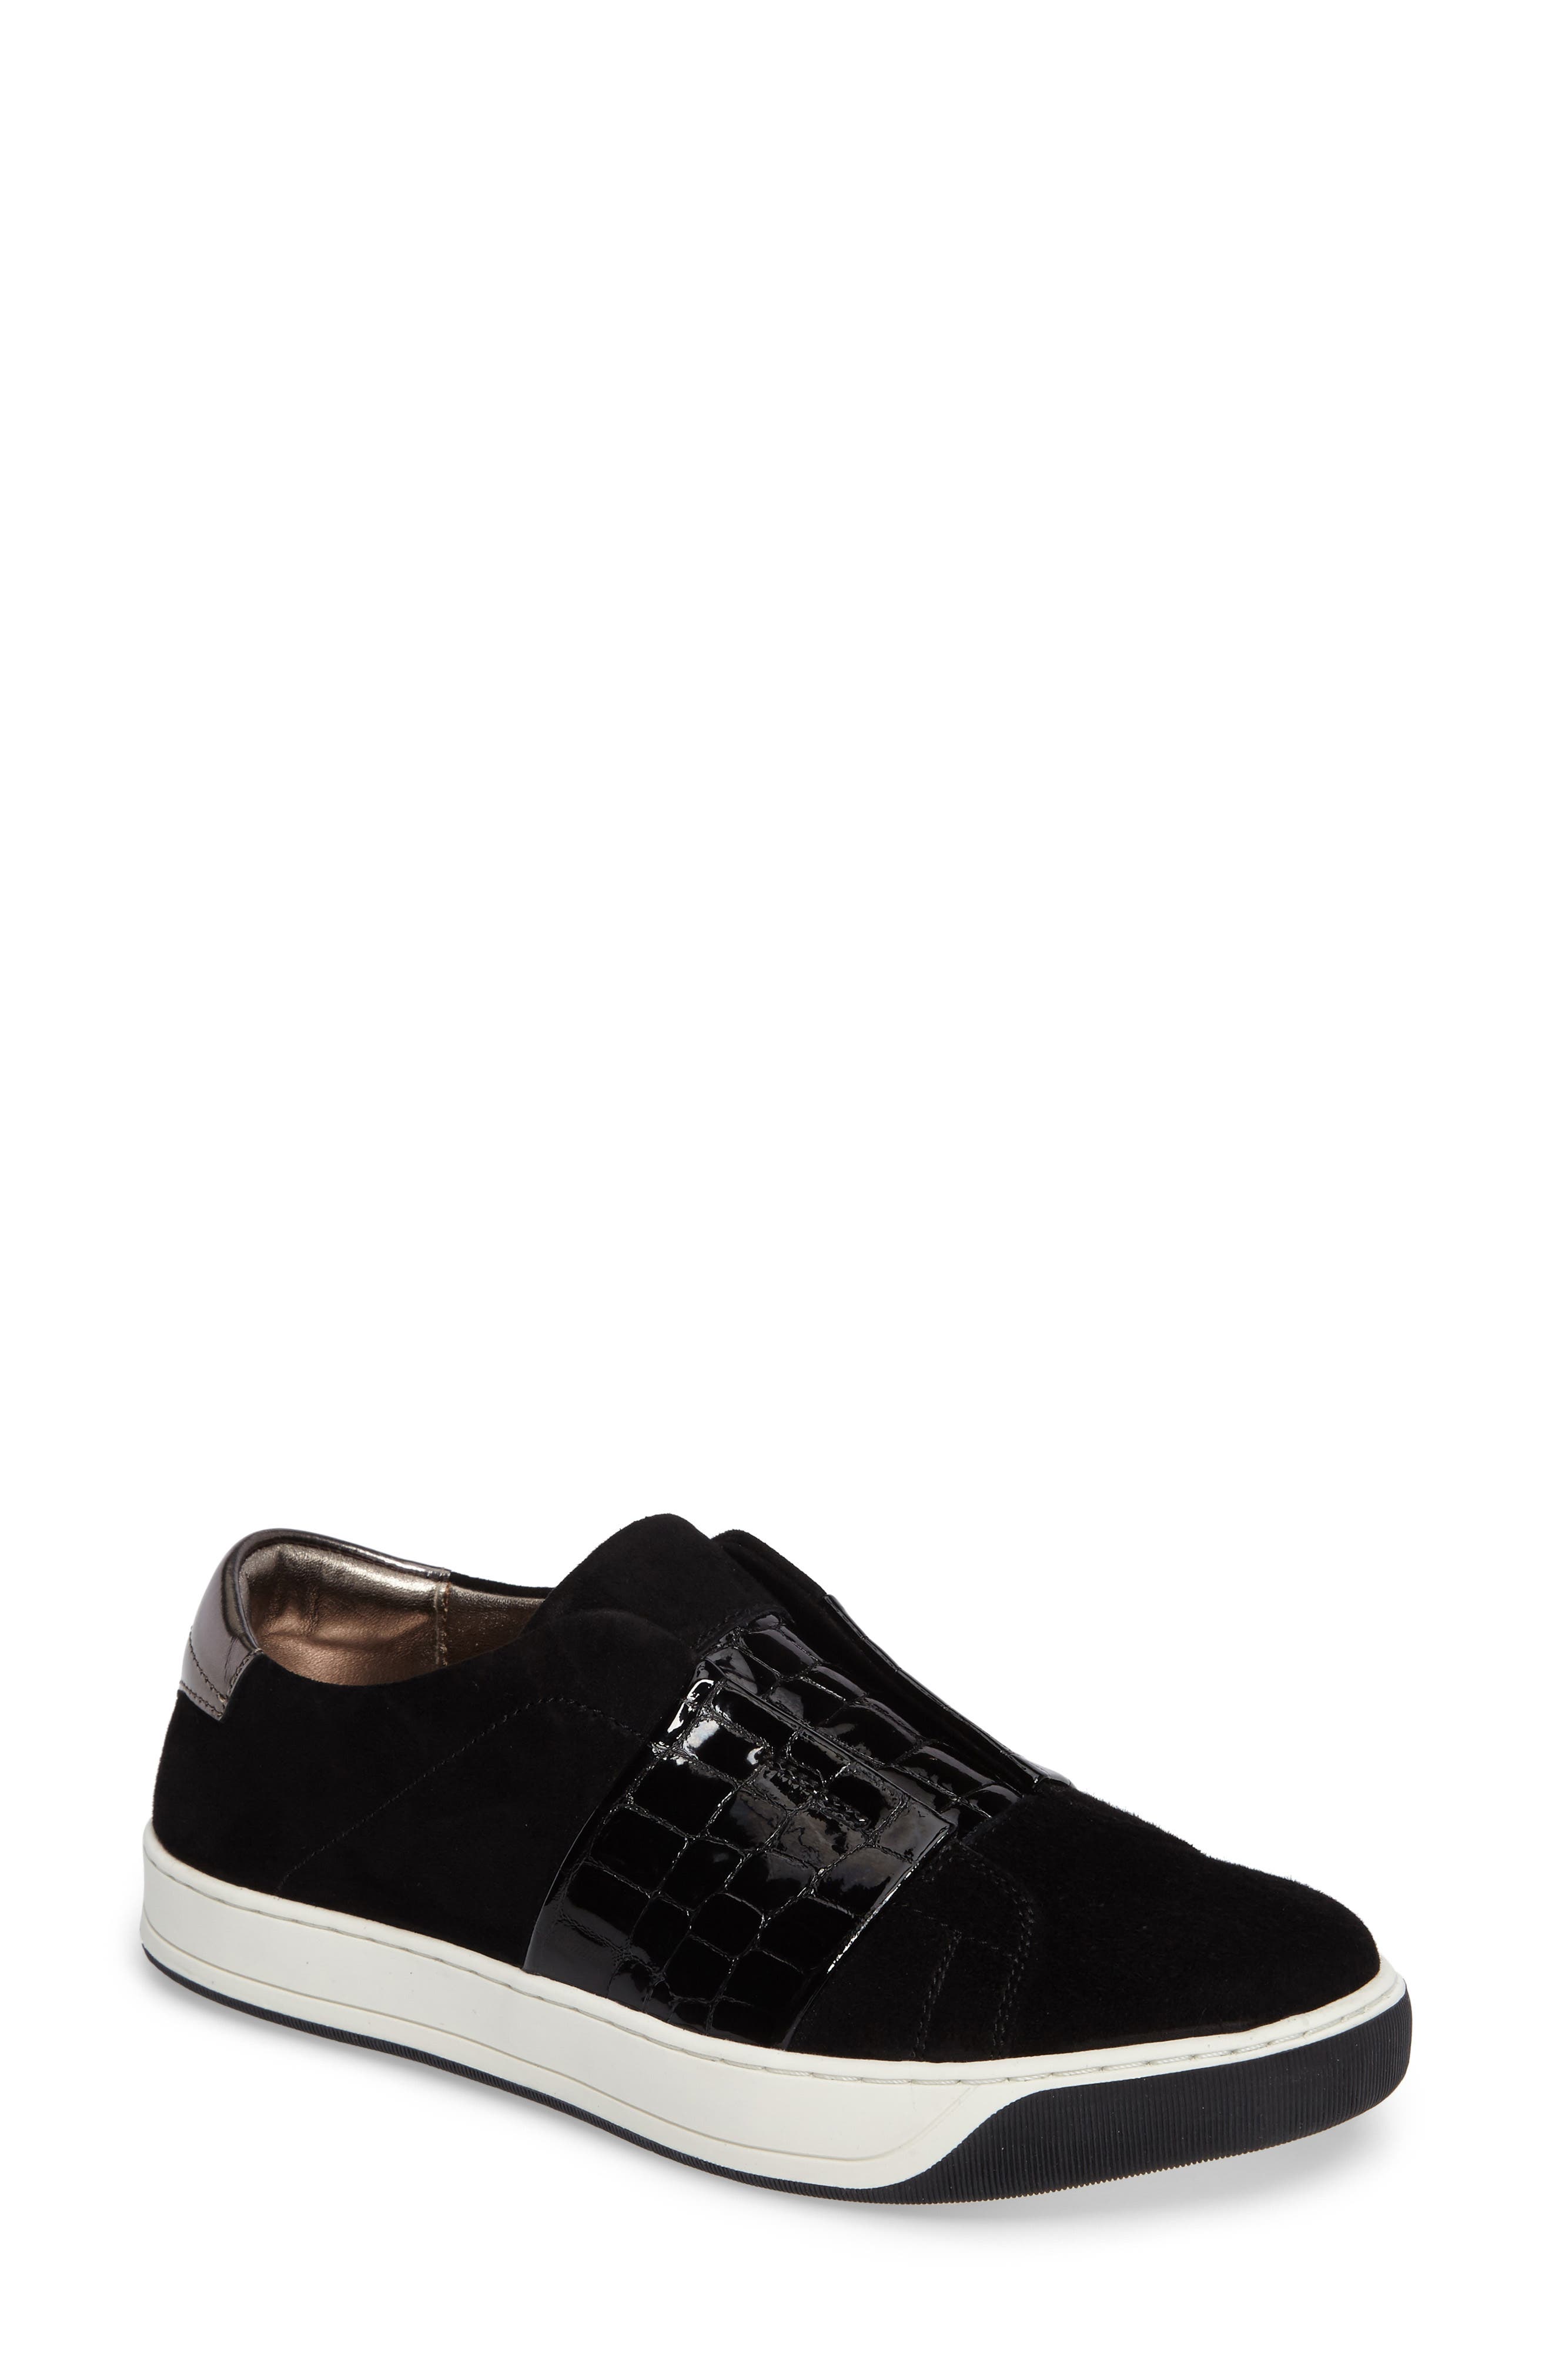 johnston and murphy womens slip on sneakers